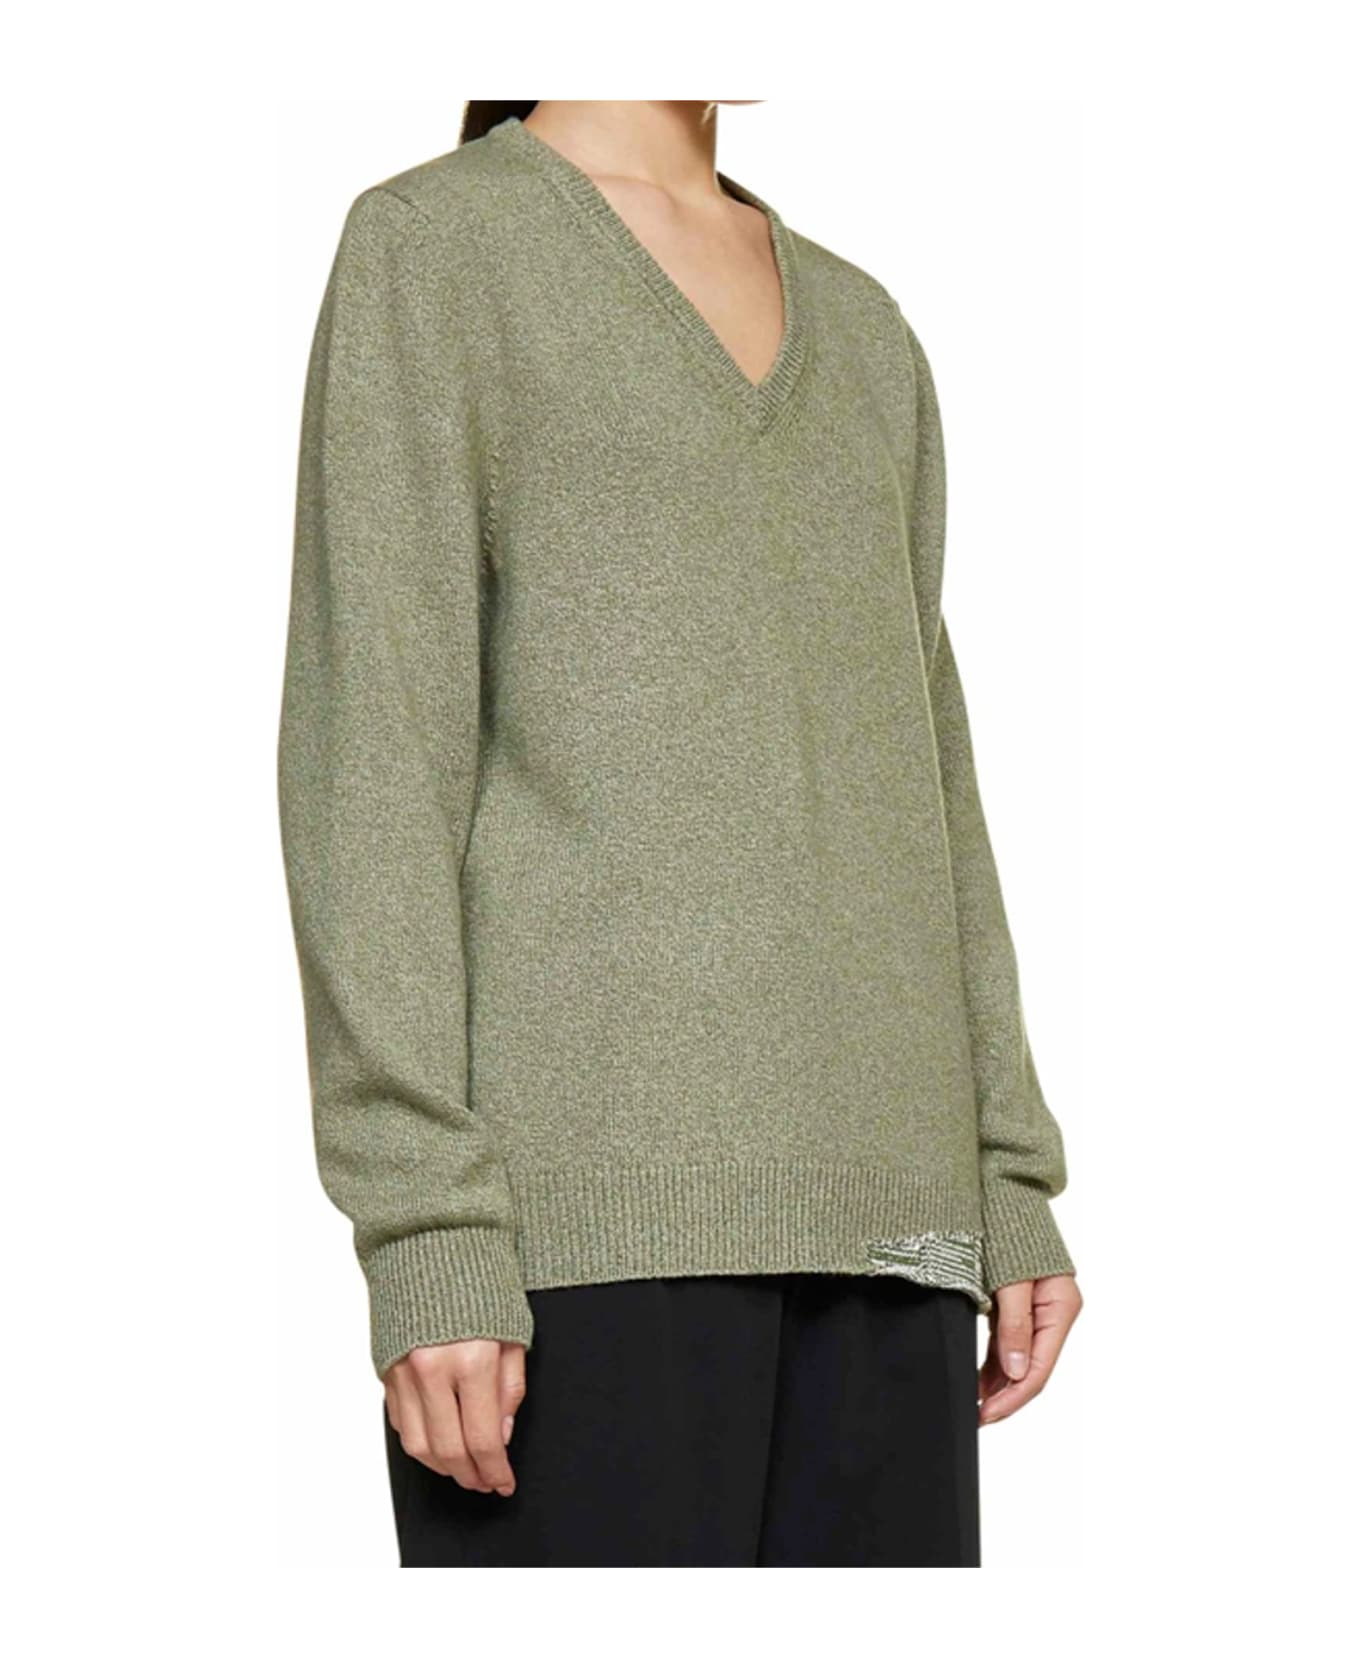 Maison Margiela Wool And Cashmere Sweater - Green